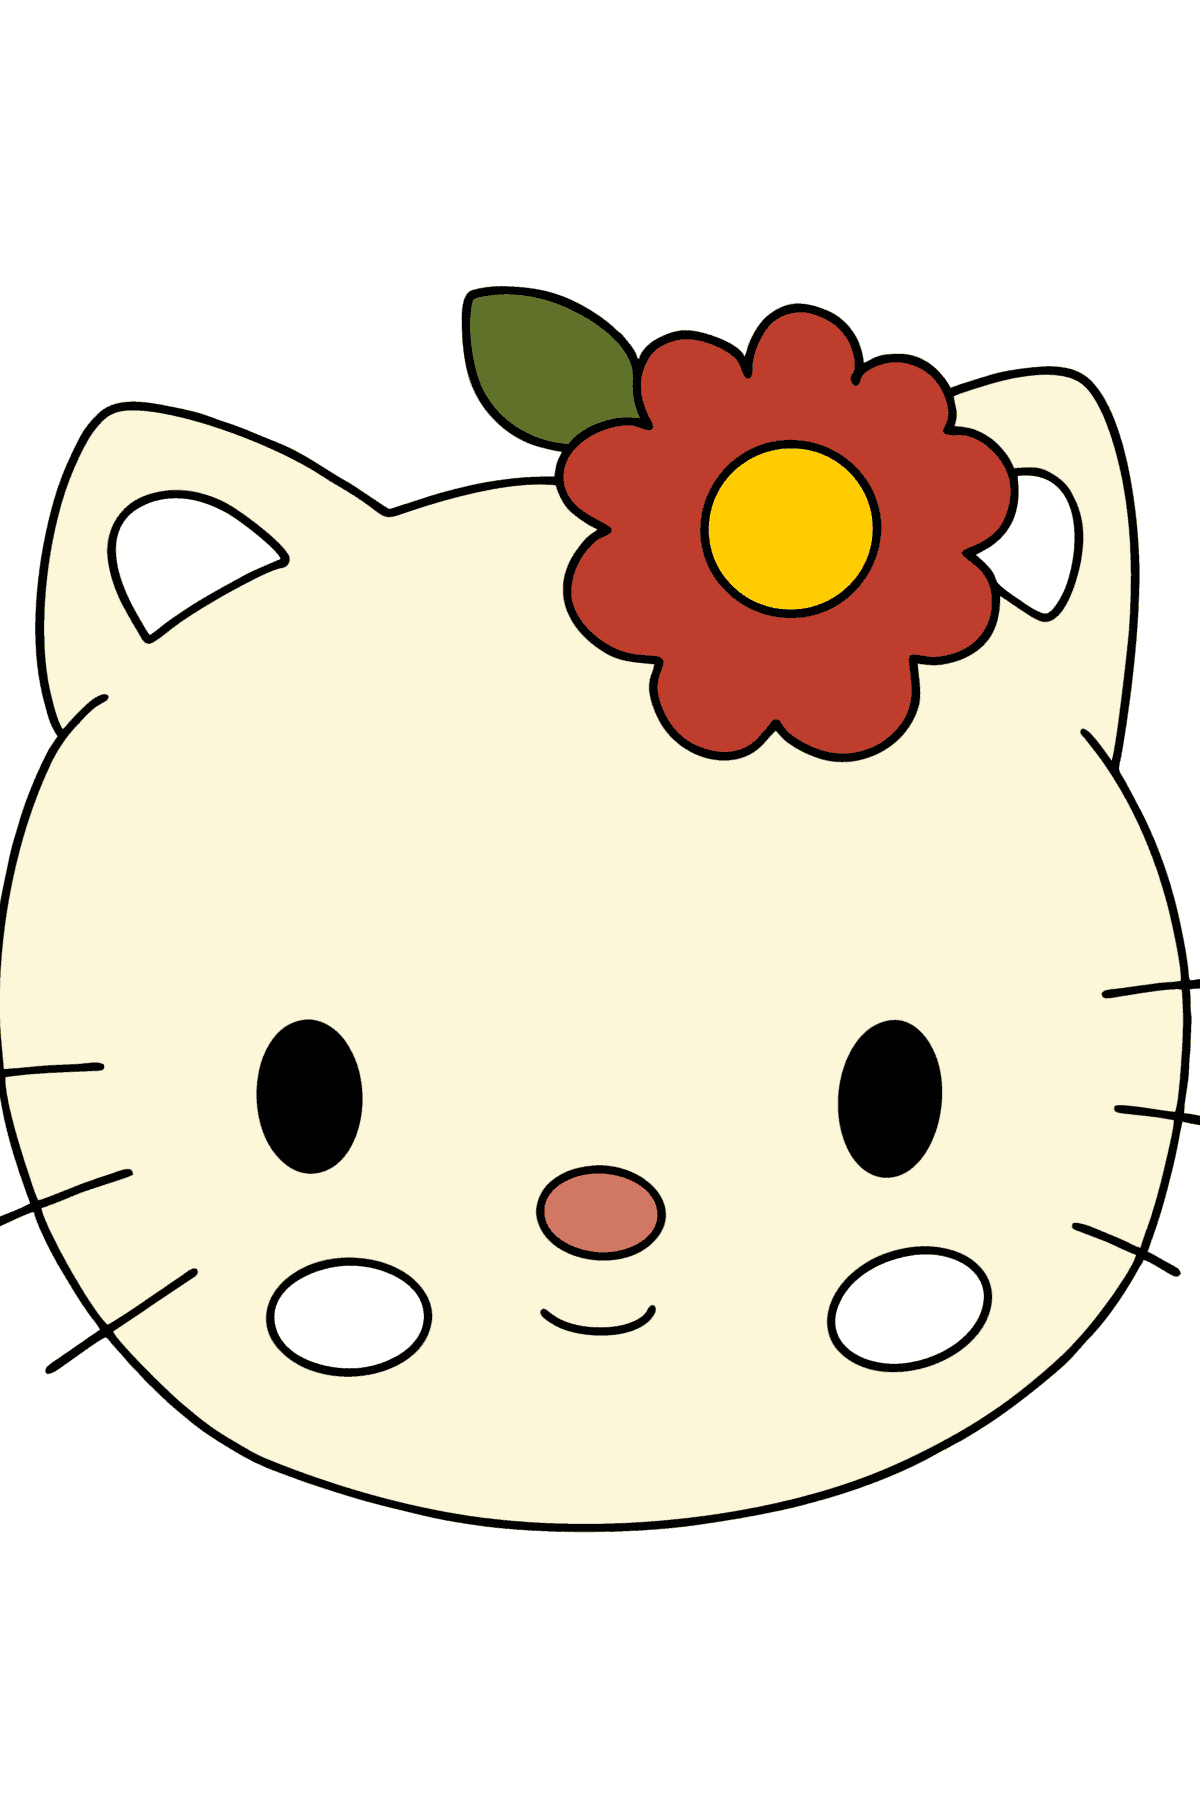 Hello Kitty muzzle colouring page - Coloring Pages for Kids